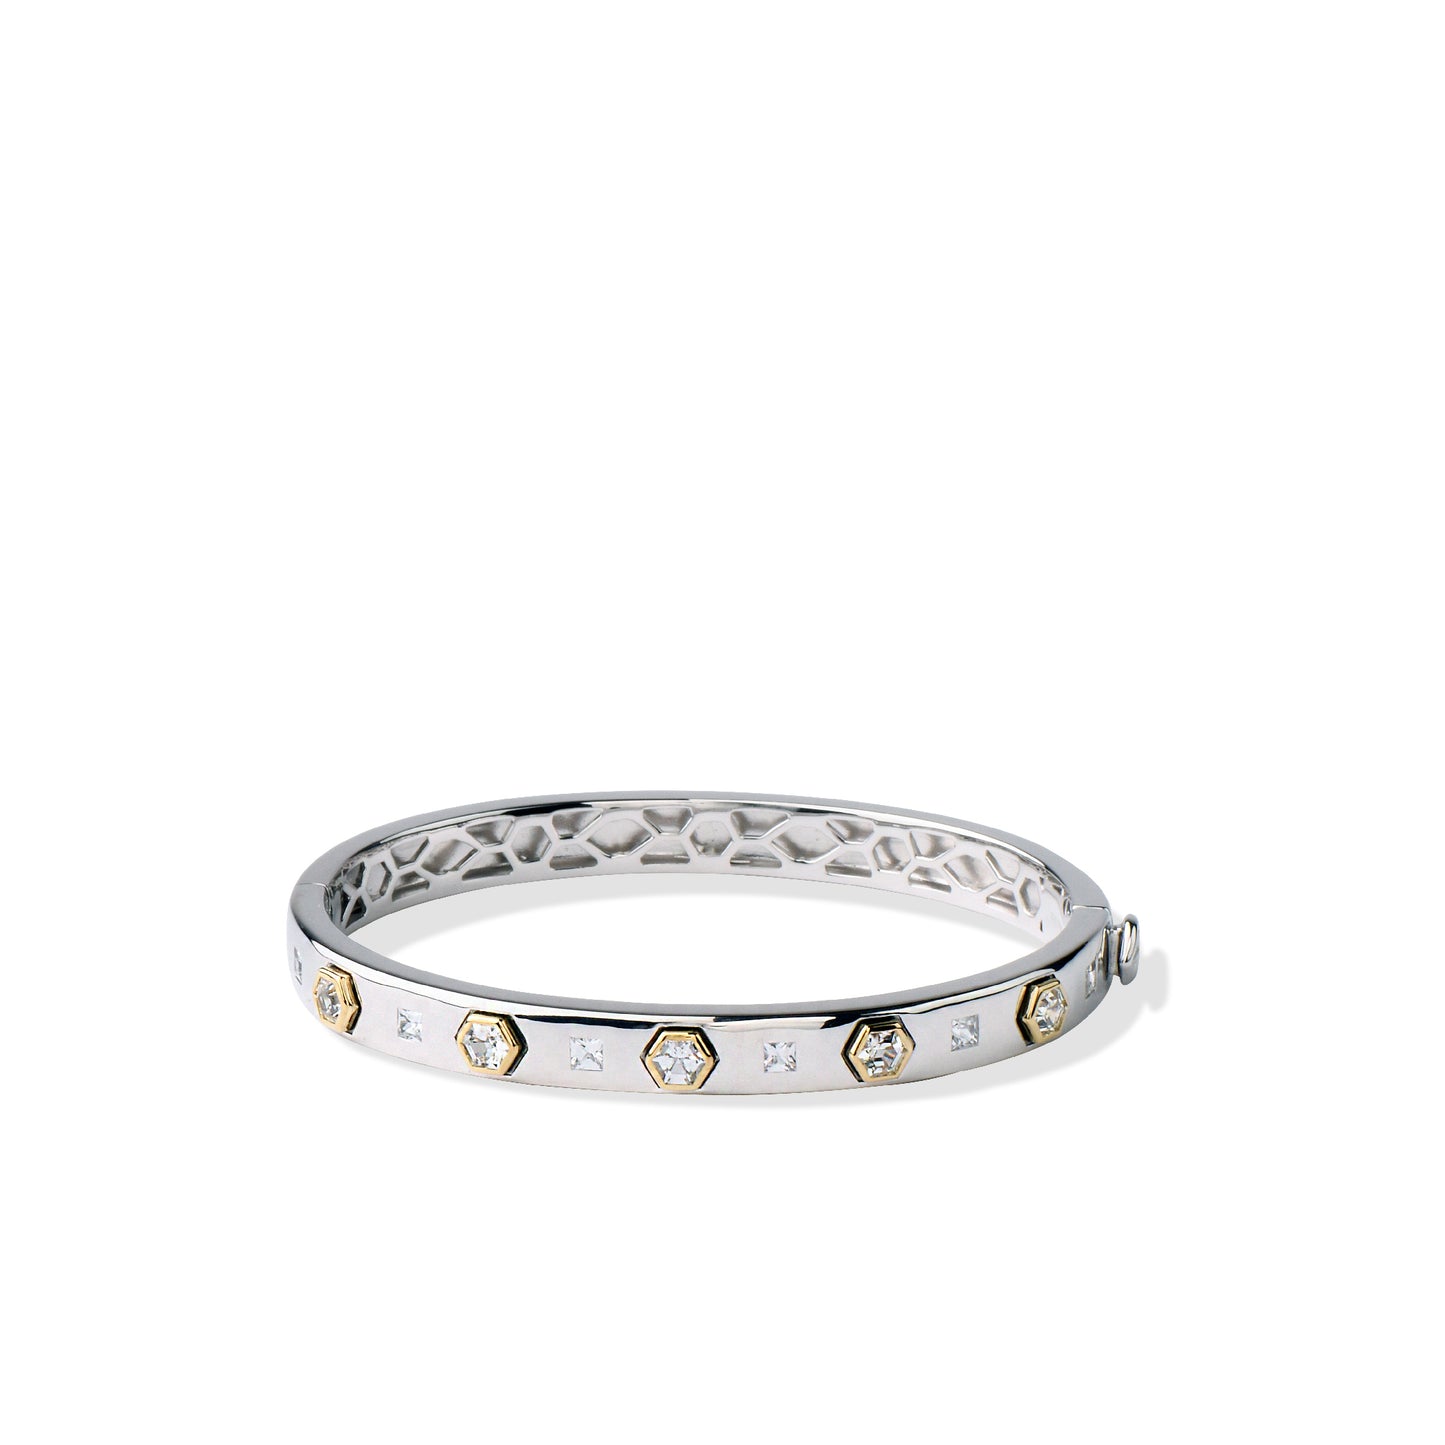 Gold and Silver Bangle Bracelet | Sterling Silver with 14K Yellow Gold Bezels